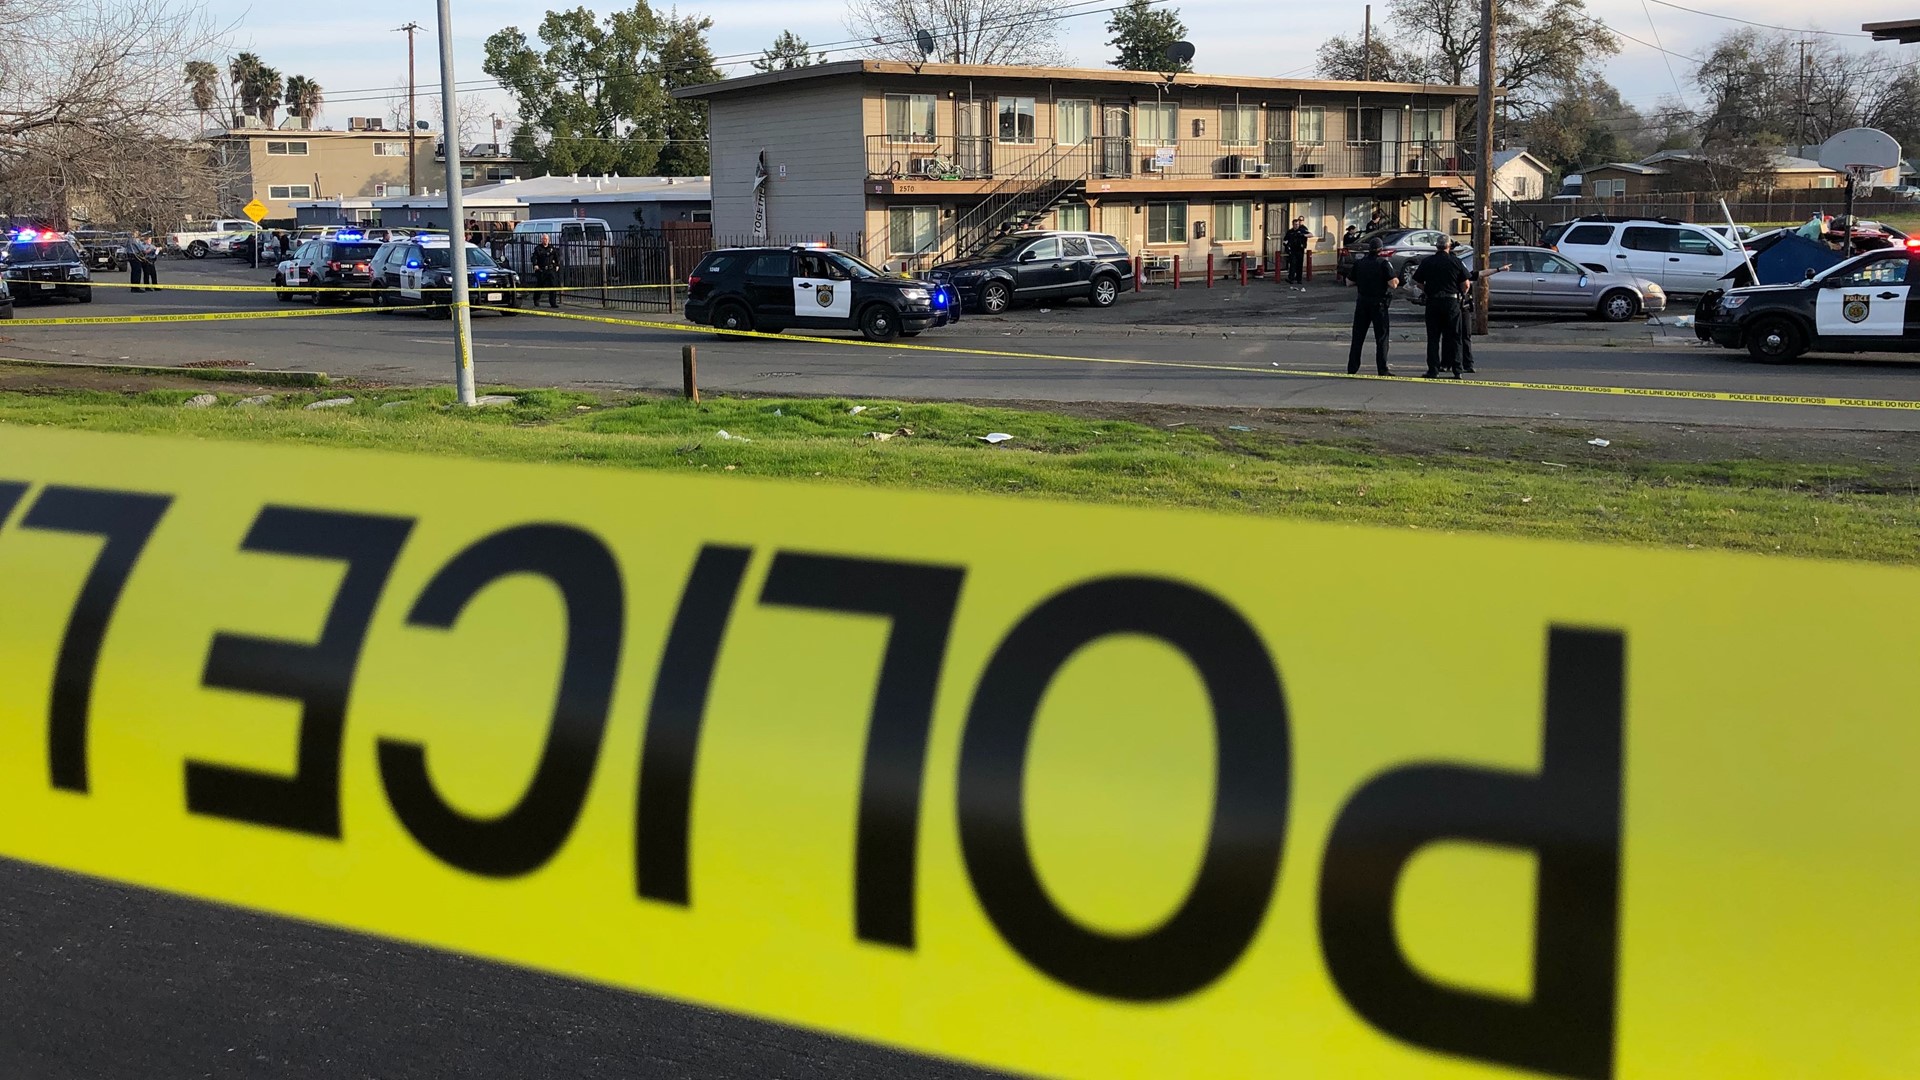 Sacramento police could not confirm where on his body he was shot, though they say his injuries are so severe, homicide detectives are investigating.